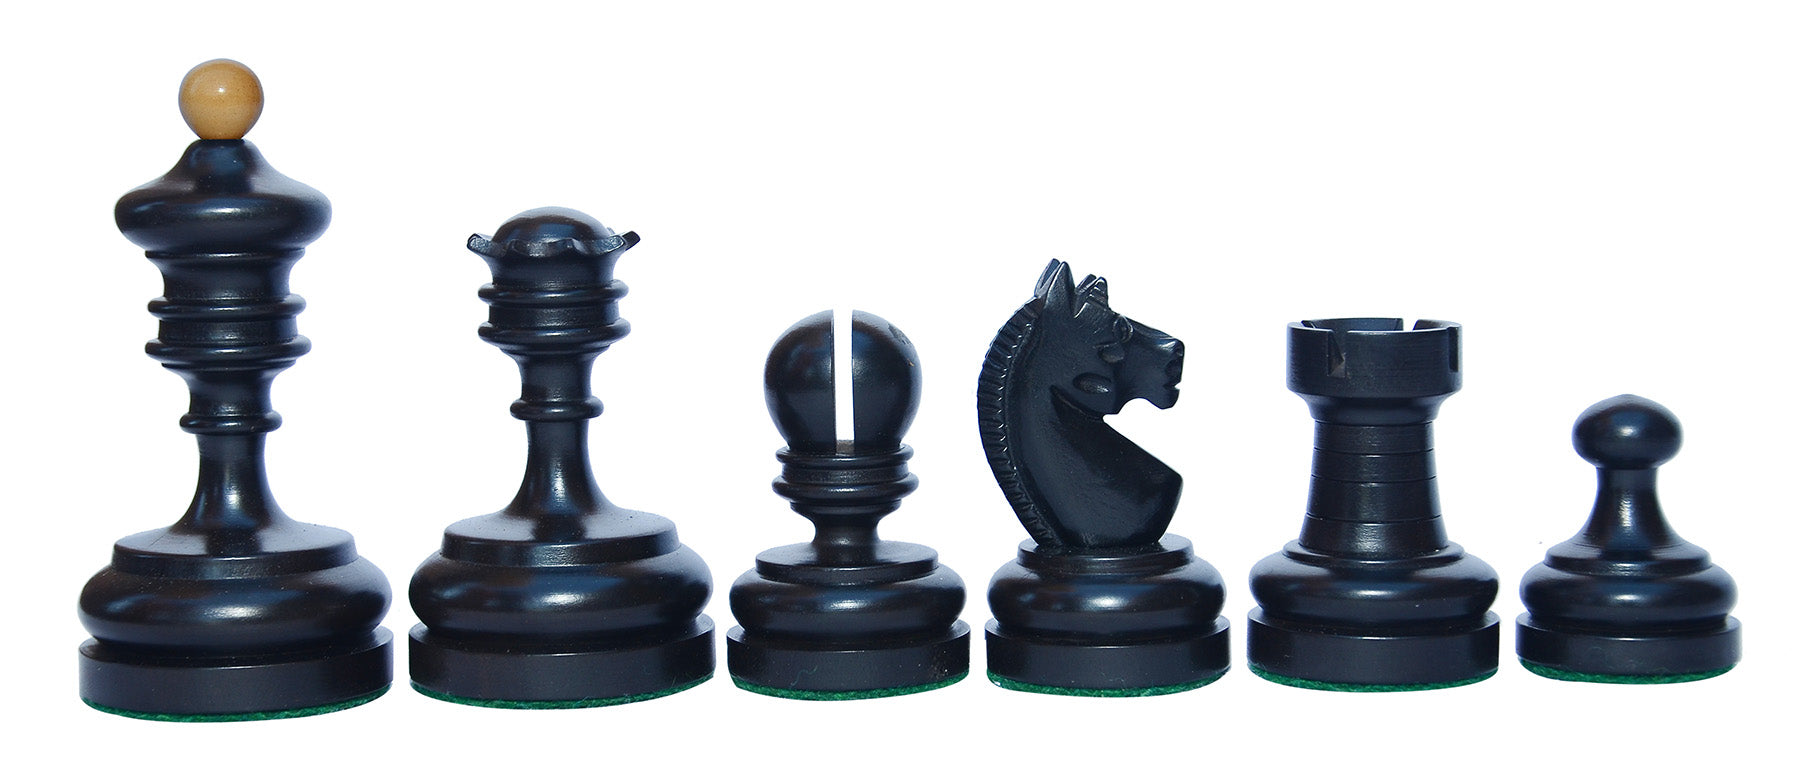 German Knubbel Reproduction Vintage 1930 Chess Set 3.5" in Antiqued and ebonised Box wood